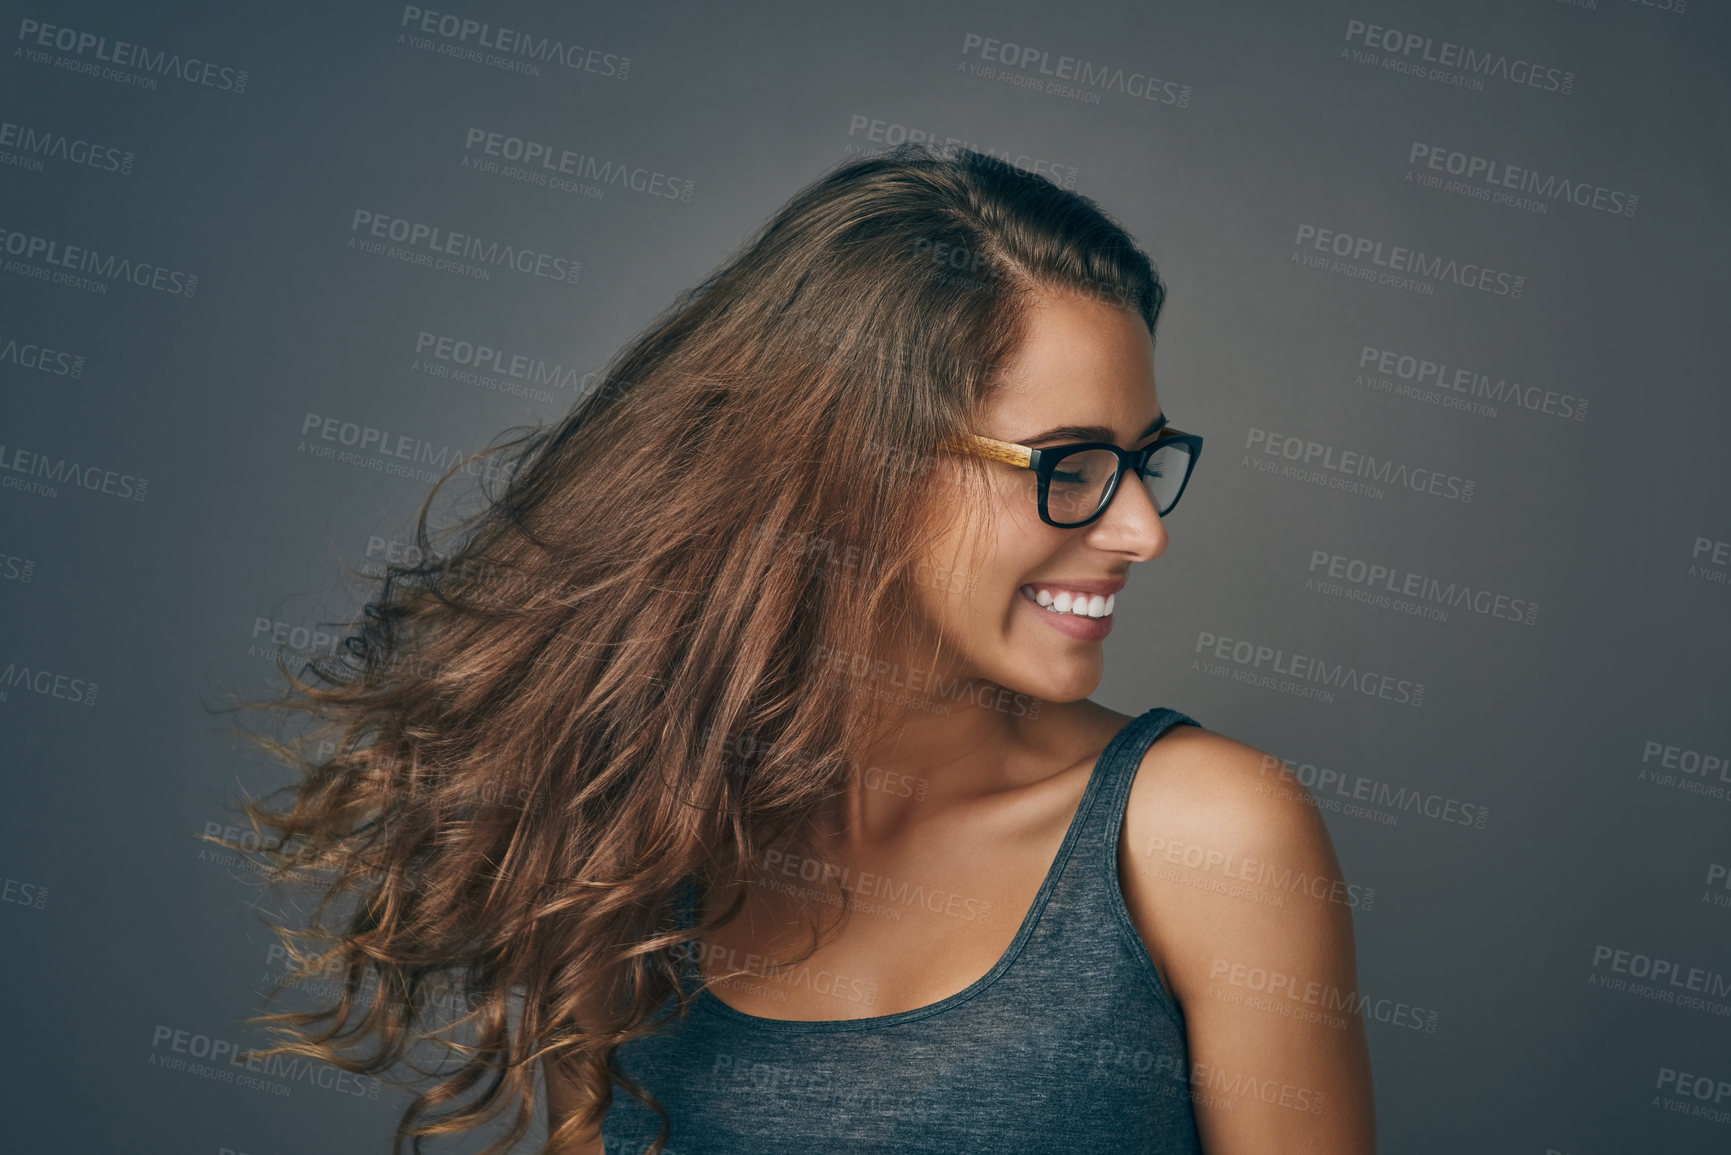 Buy stock photo Studio shot of an attractive young woman wearing glasses